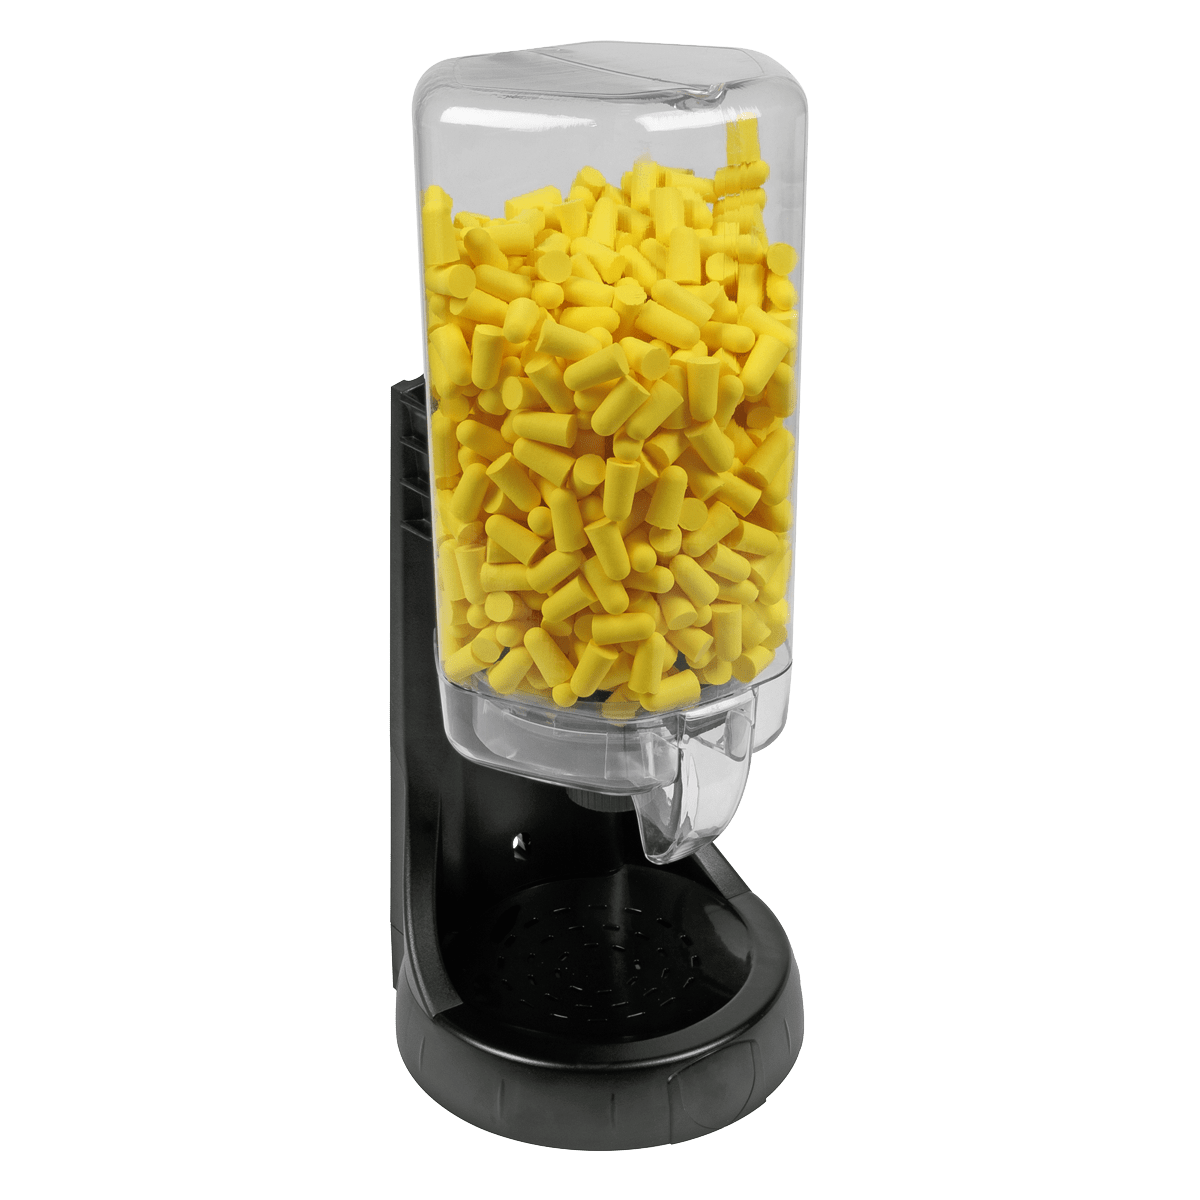 Sealey Ear Plugs Dispenser Disposable - 500 Pairs